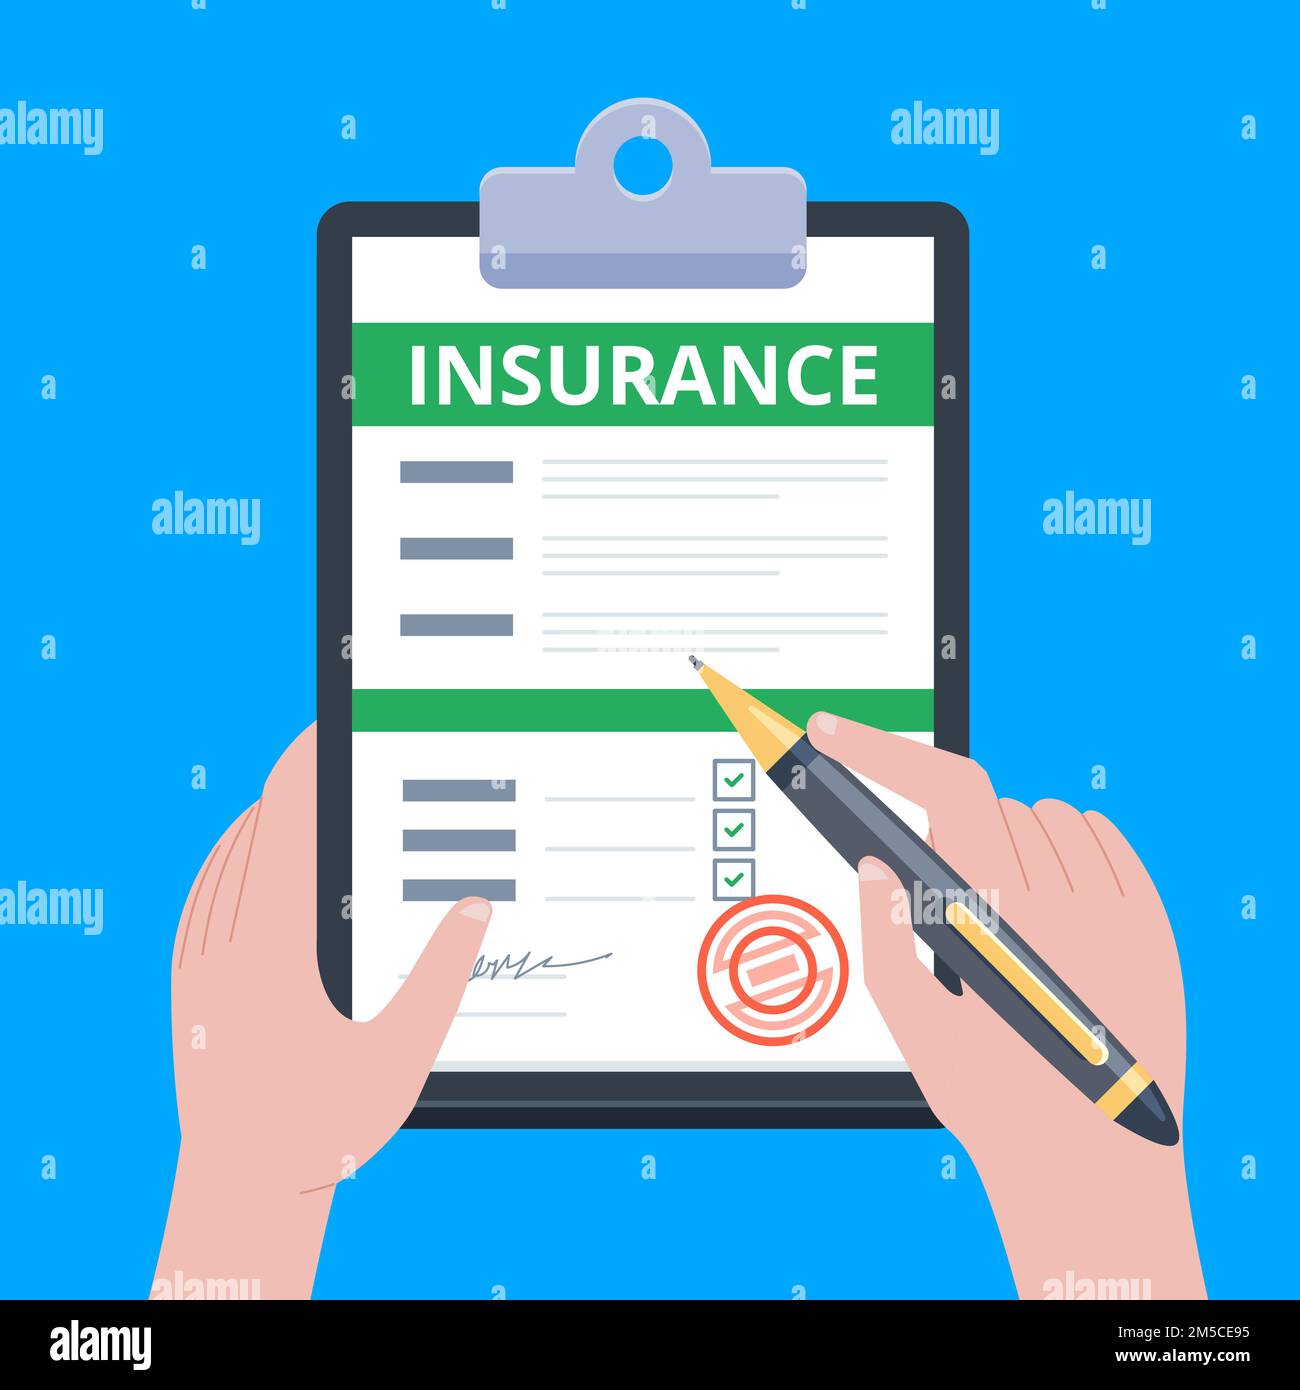 Insurance claim form. Man writes form, holding clipboard in hand. Vector illustration flat design. Stock Vector